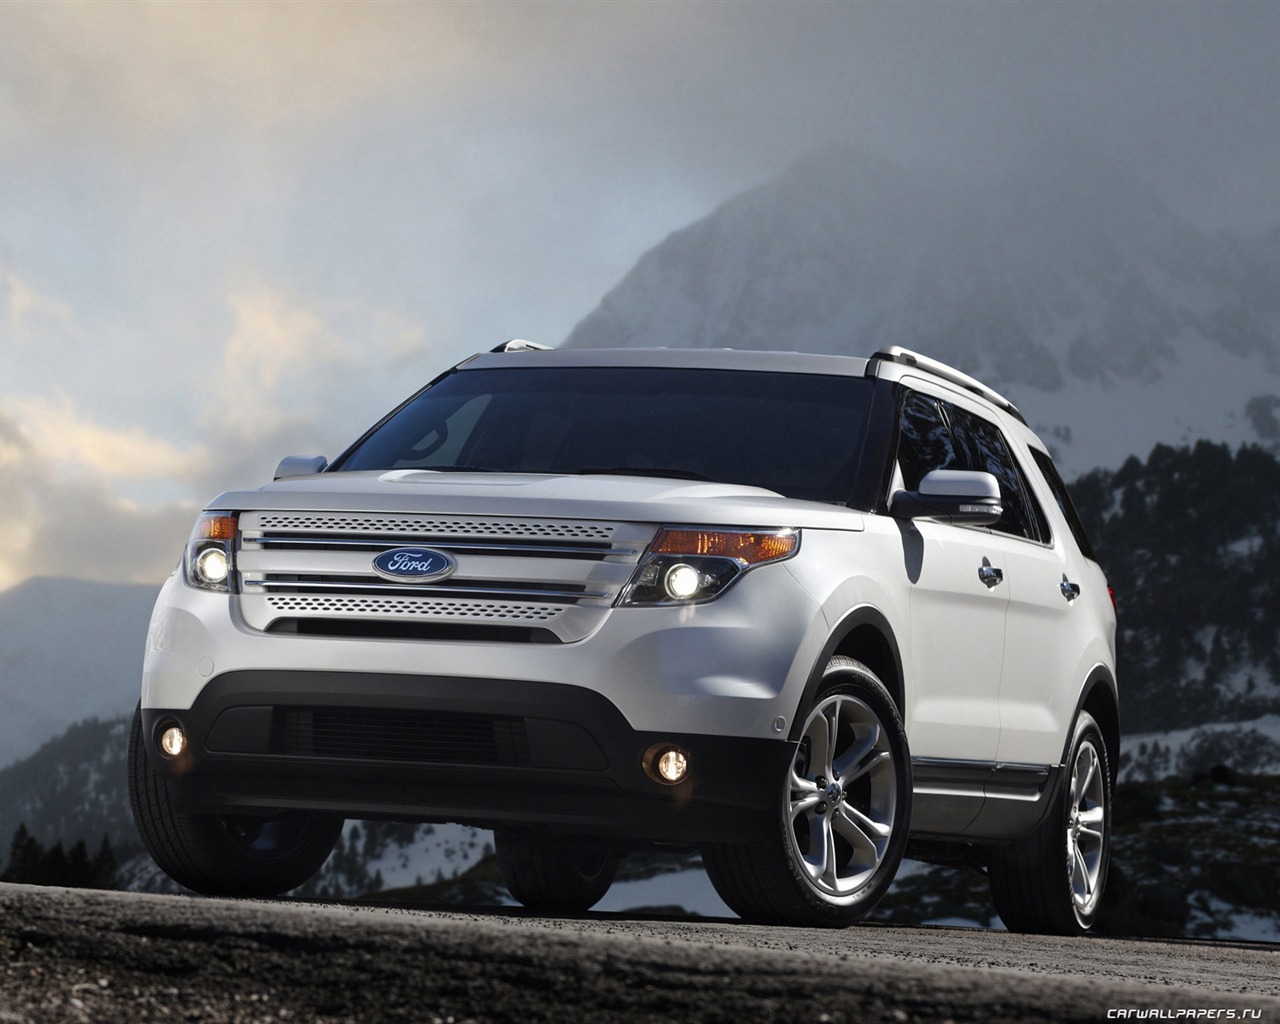 Ford Explorer Limited - 2011 福特 #13 - 1280x1024